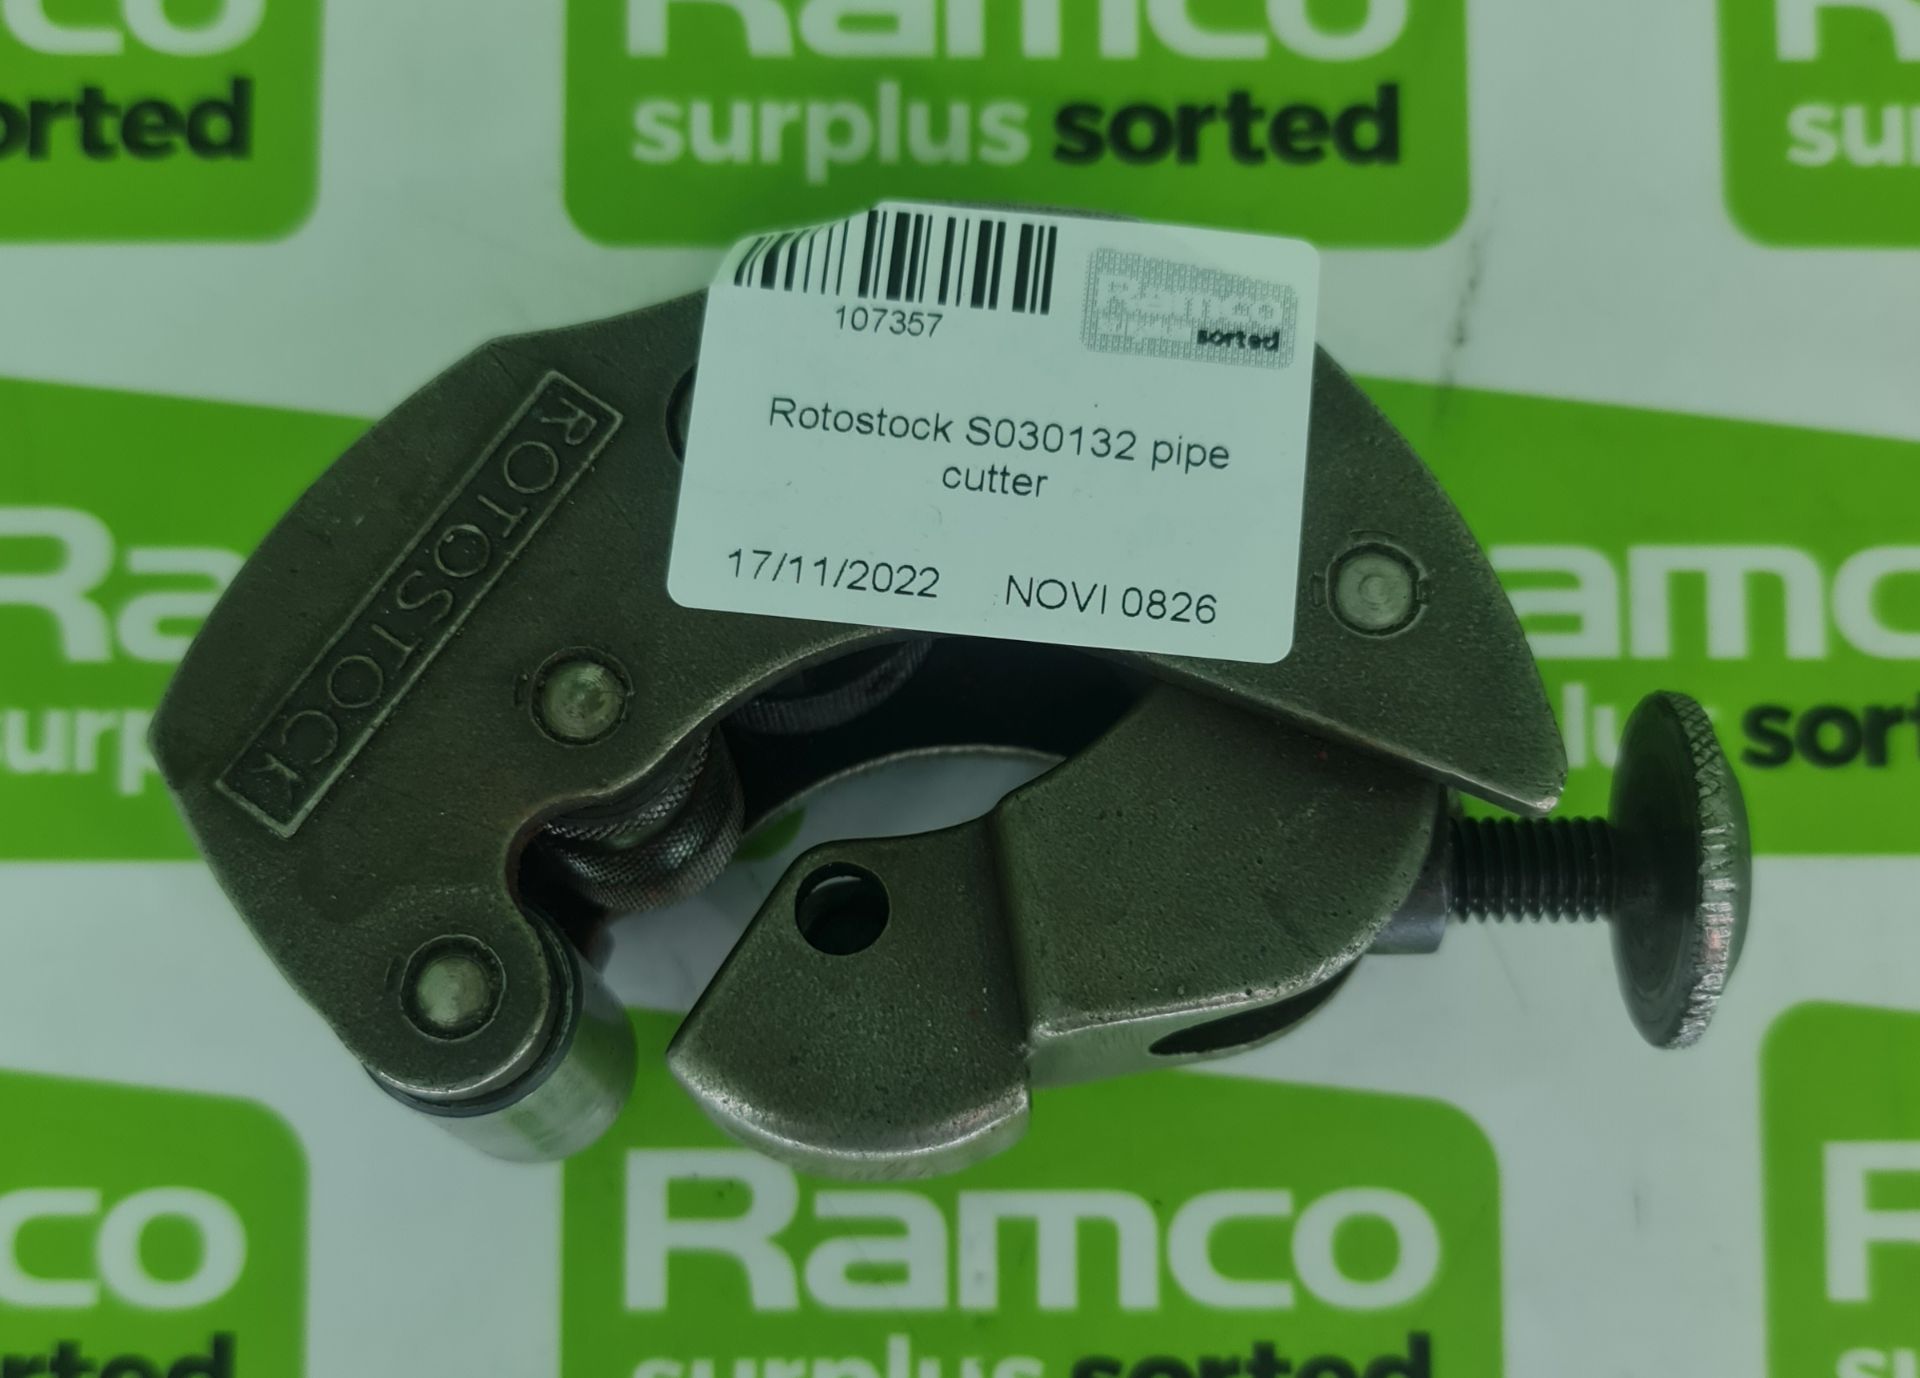 Rotostock S030132 pipe cutter